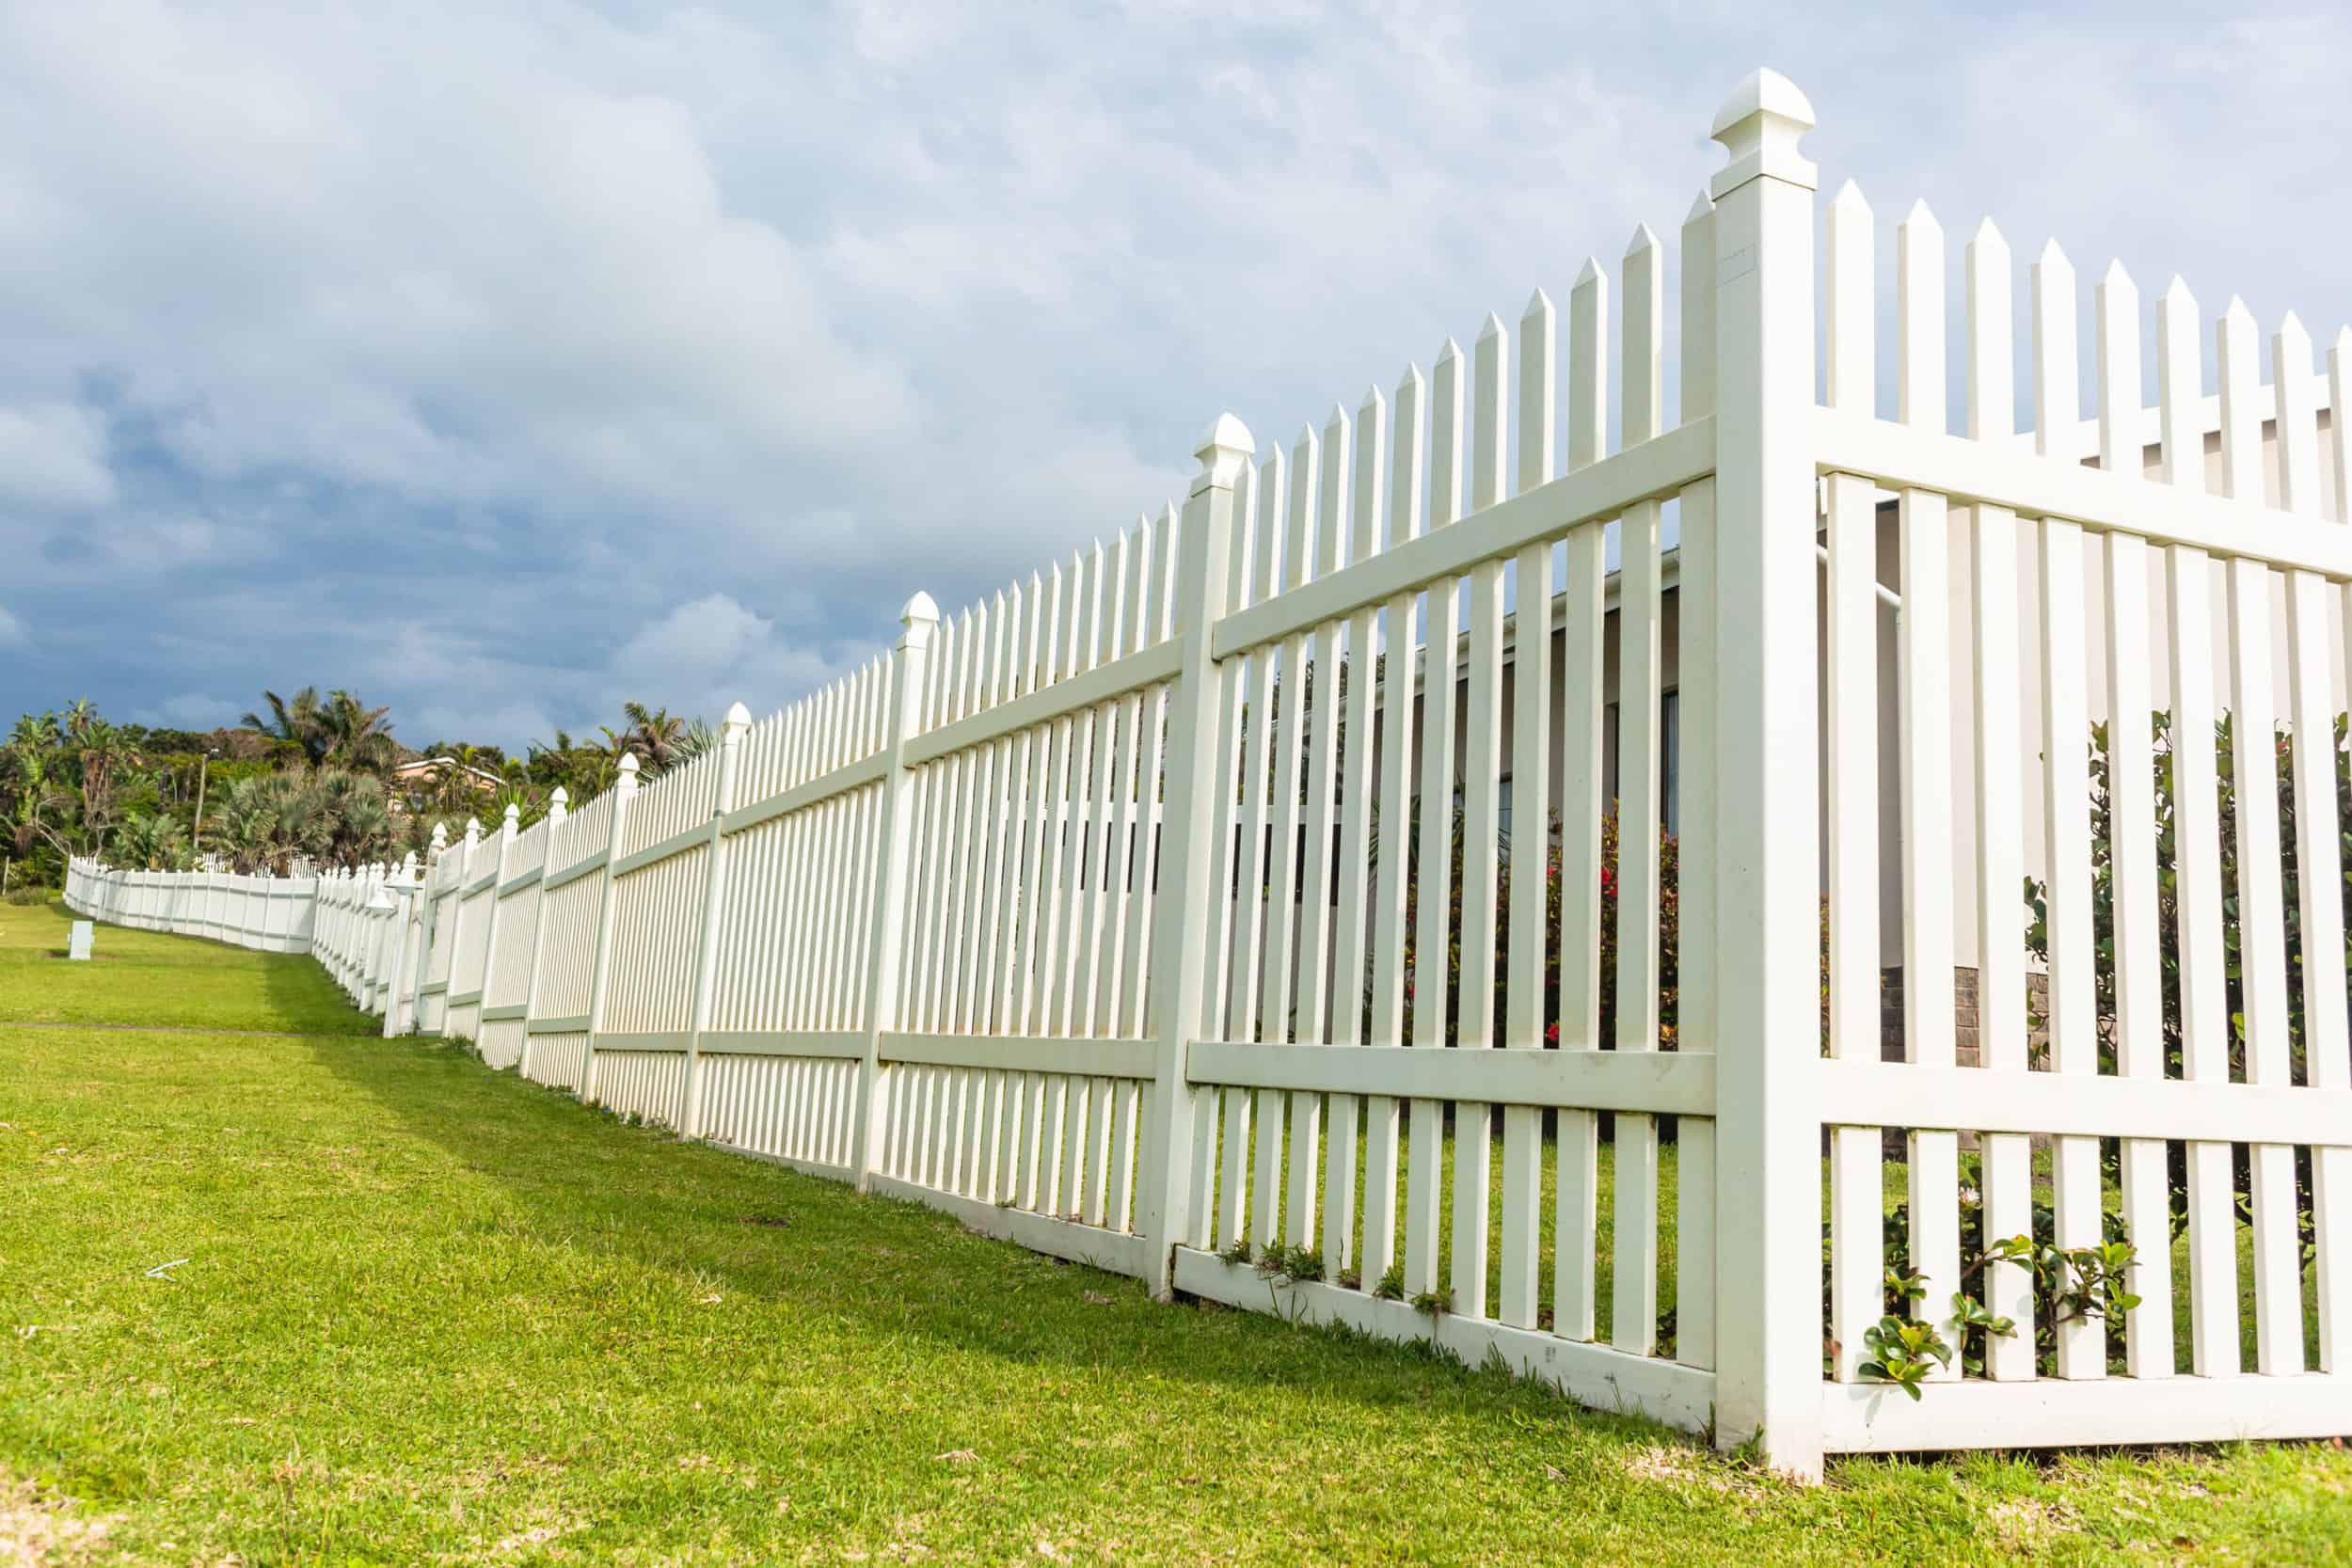 The Benefits Of A Pvc Fence Over A Wood Fence